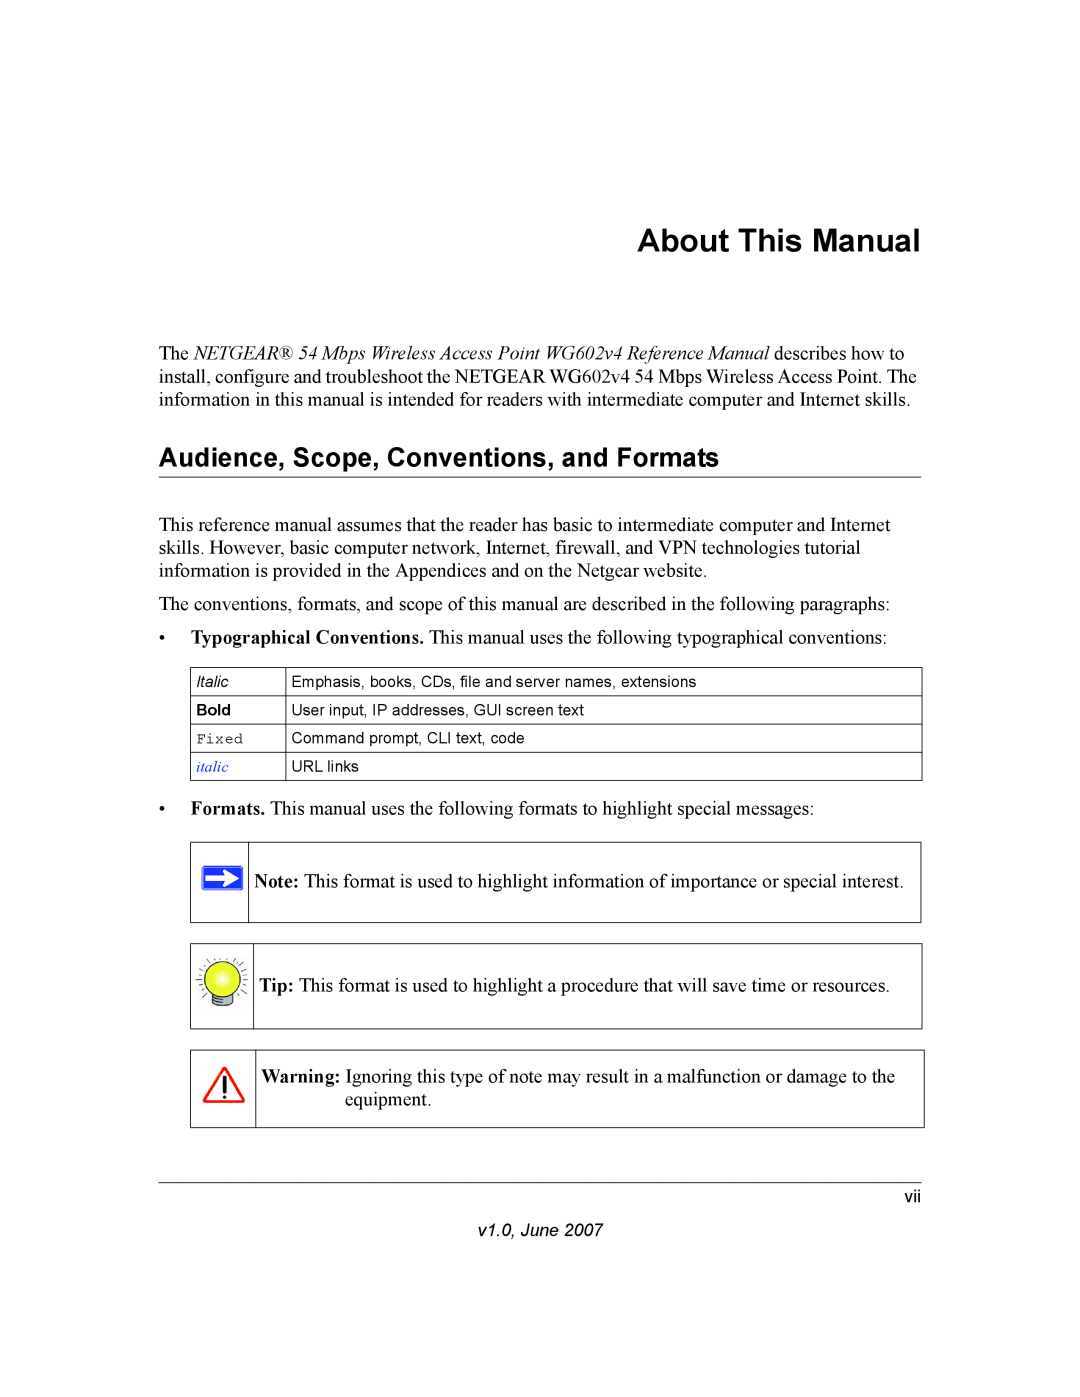 NETGEAR WG602V4 manual About This Manual, Audience, Scope, Conventions, and Formats 